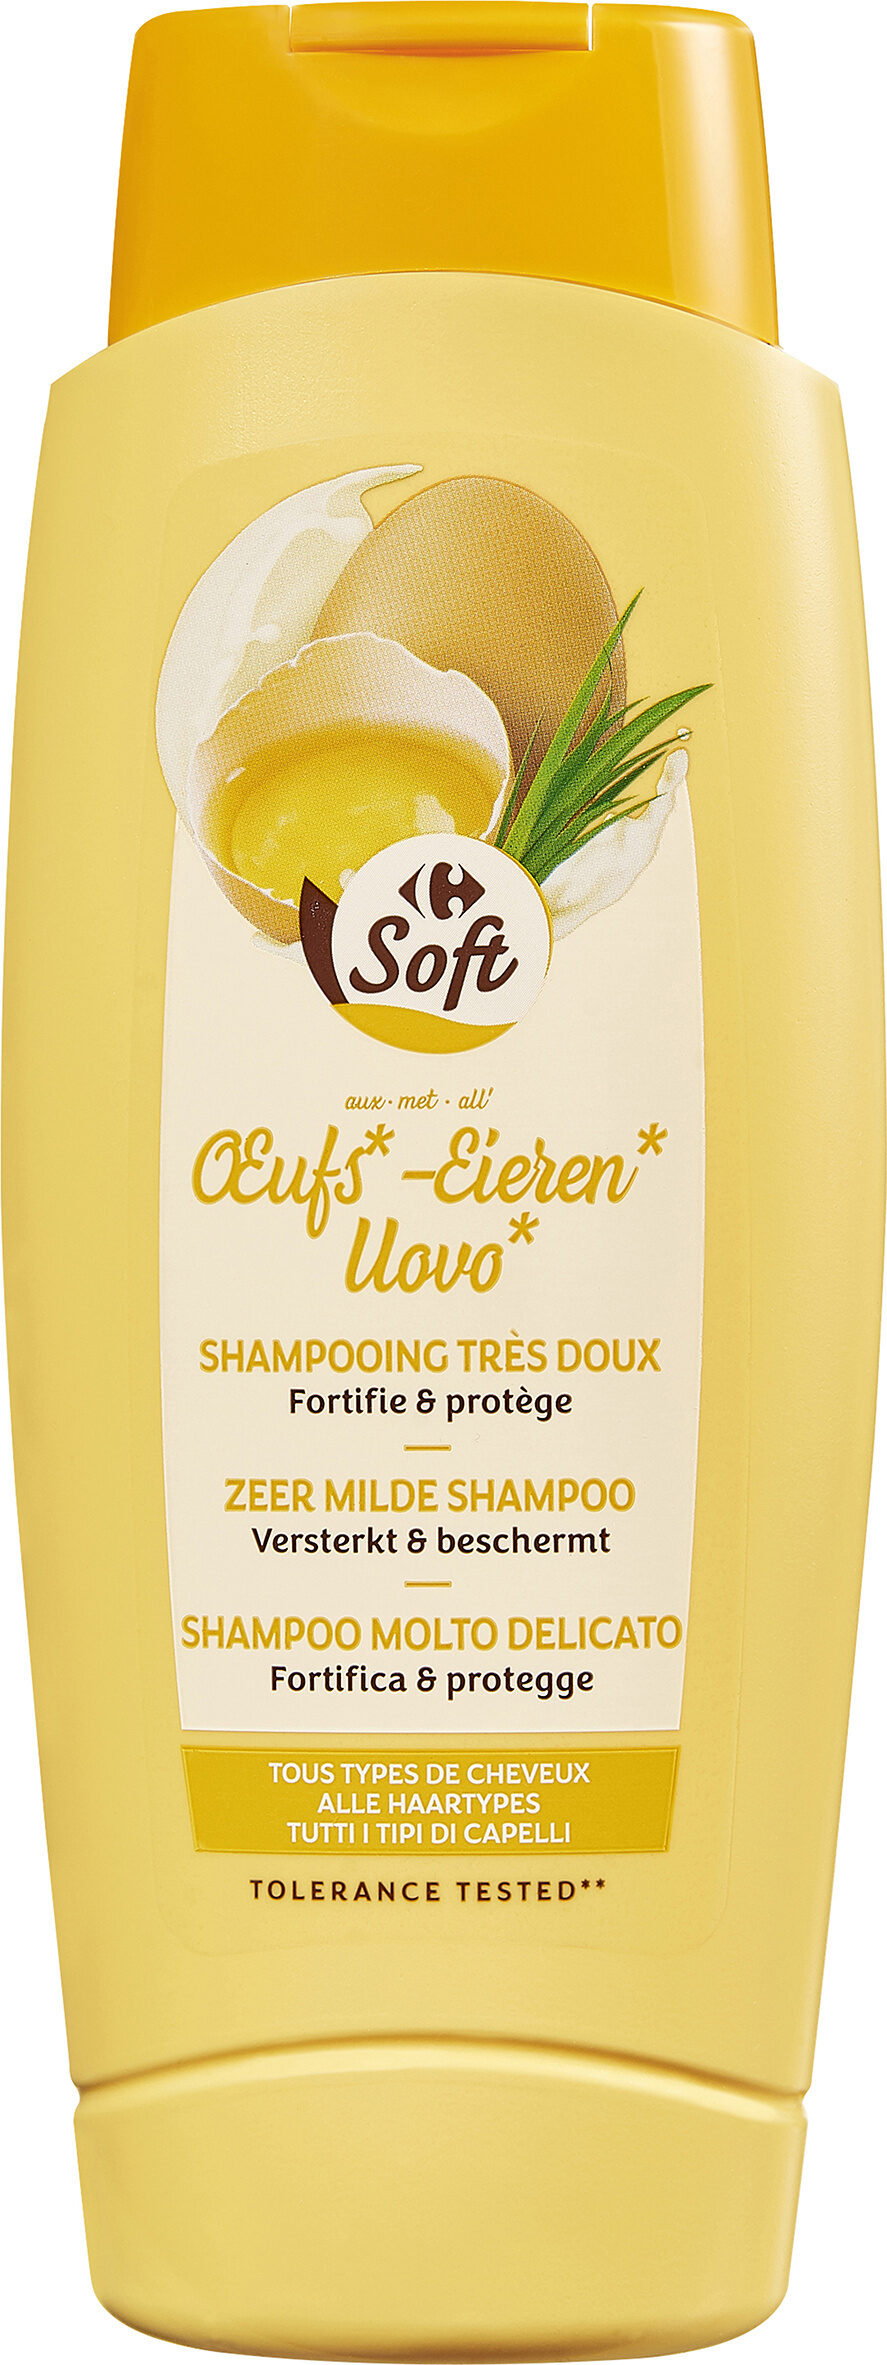 Carrefour Shampooing fortifiant aux œufs - Tuote - fr